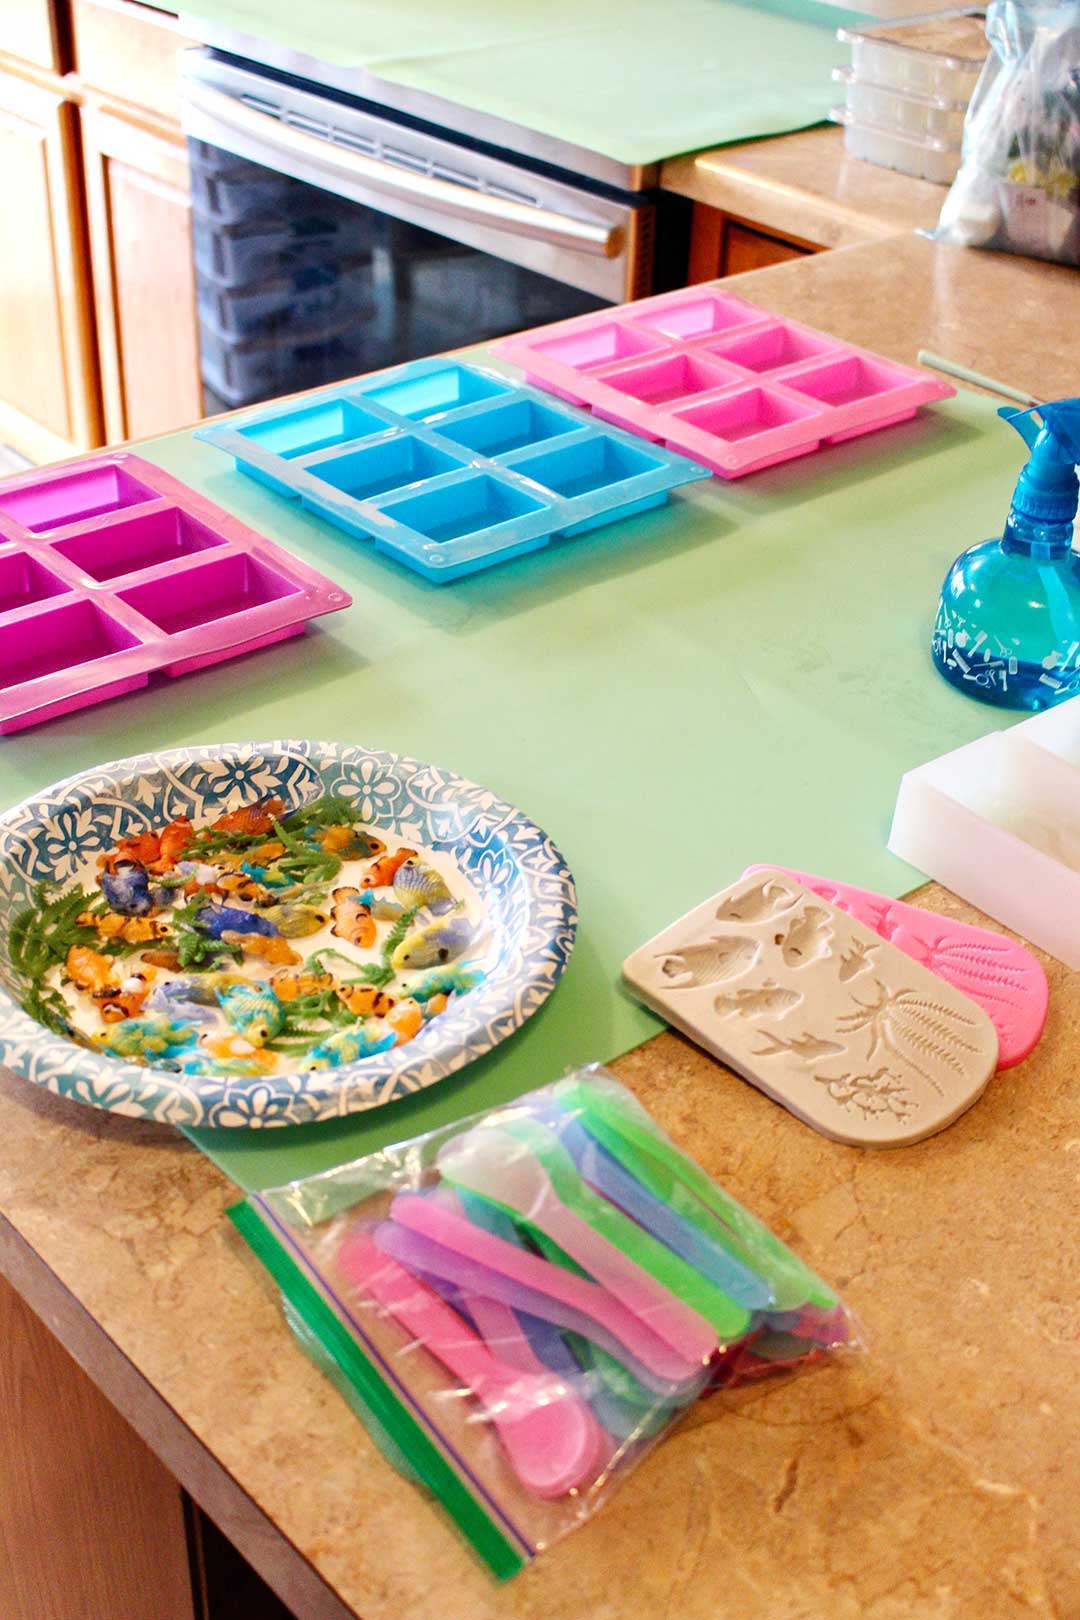 Soap making supplies on a counter. Rectangular soap molds, colorful plastic spoons and a paper plate with plastic tropical fish.